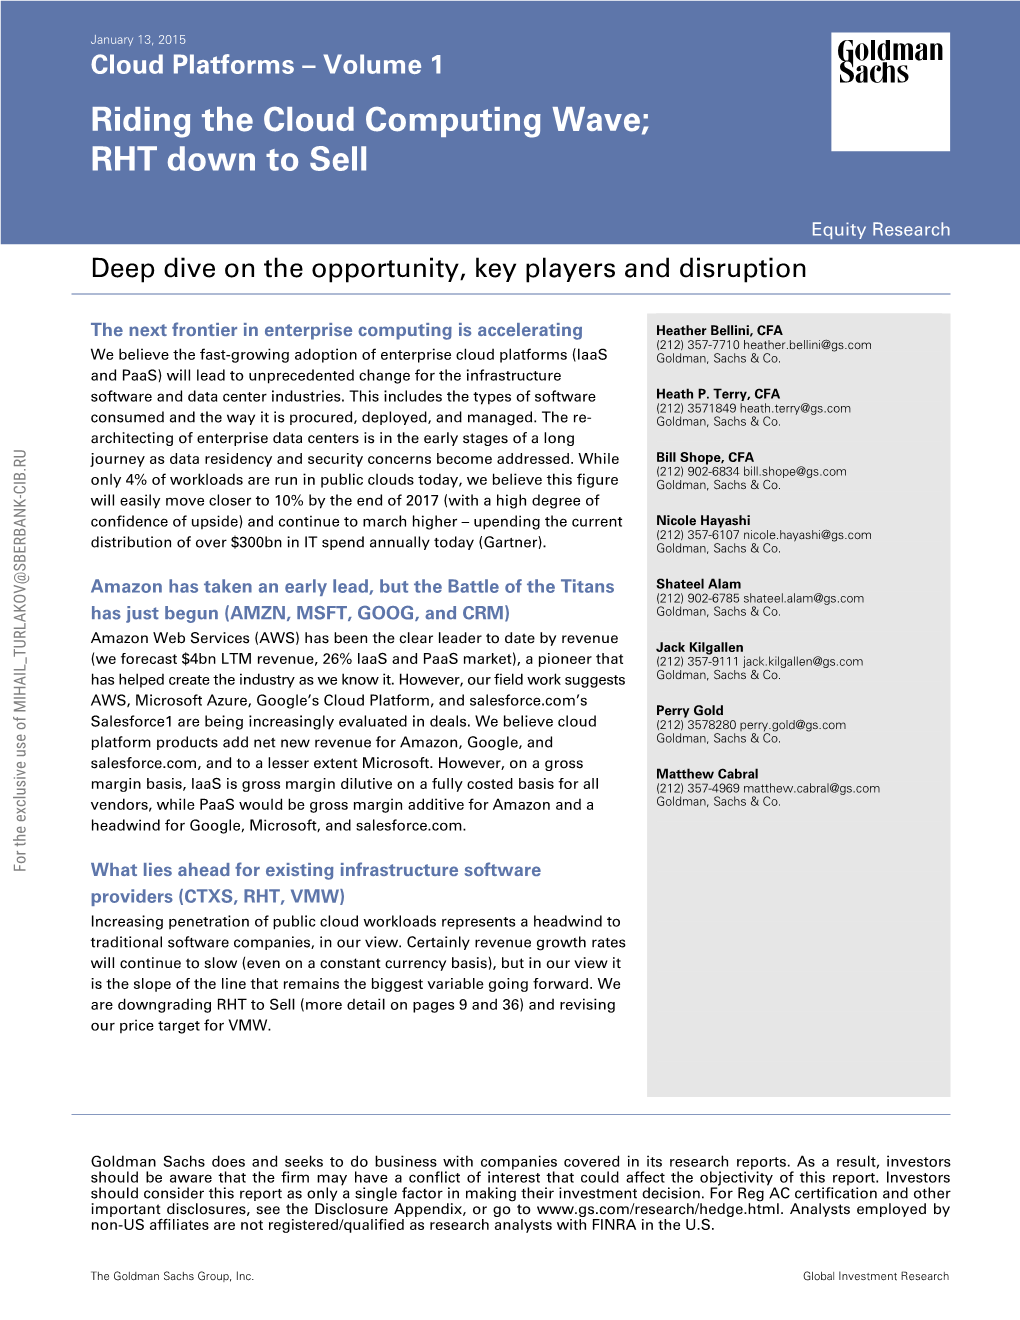 Riding the Cloud Computing Wave; RHT Down to Sell